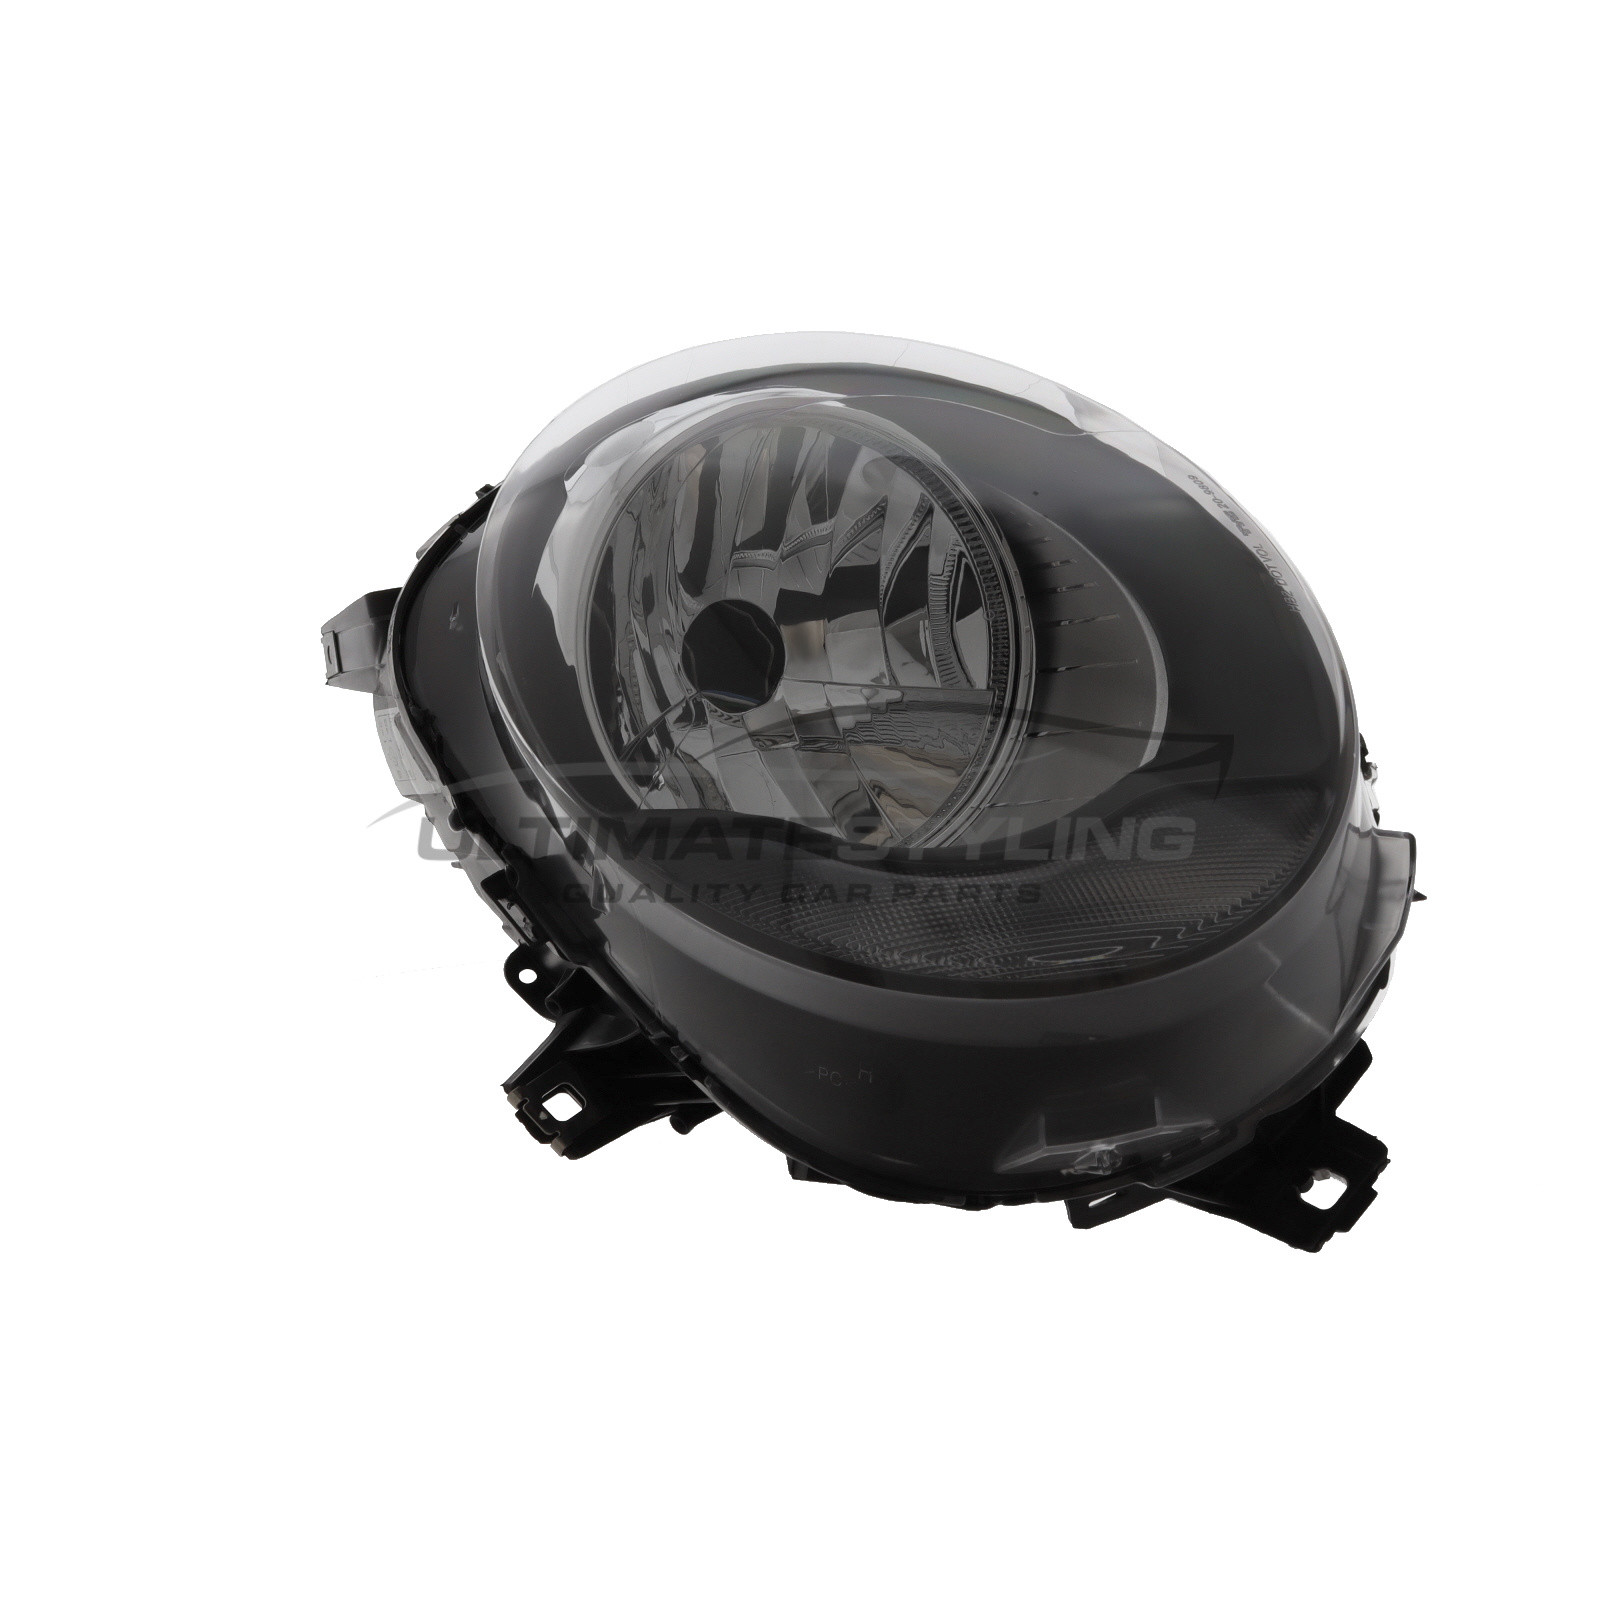 Mini 2014-2018 Halogen, Electric With Motor, Headlight / Headlamp with Black Surround Including Clear Indicator Drivers Side (RH)